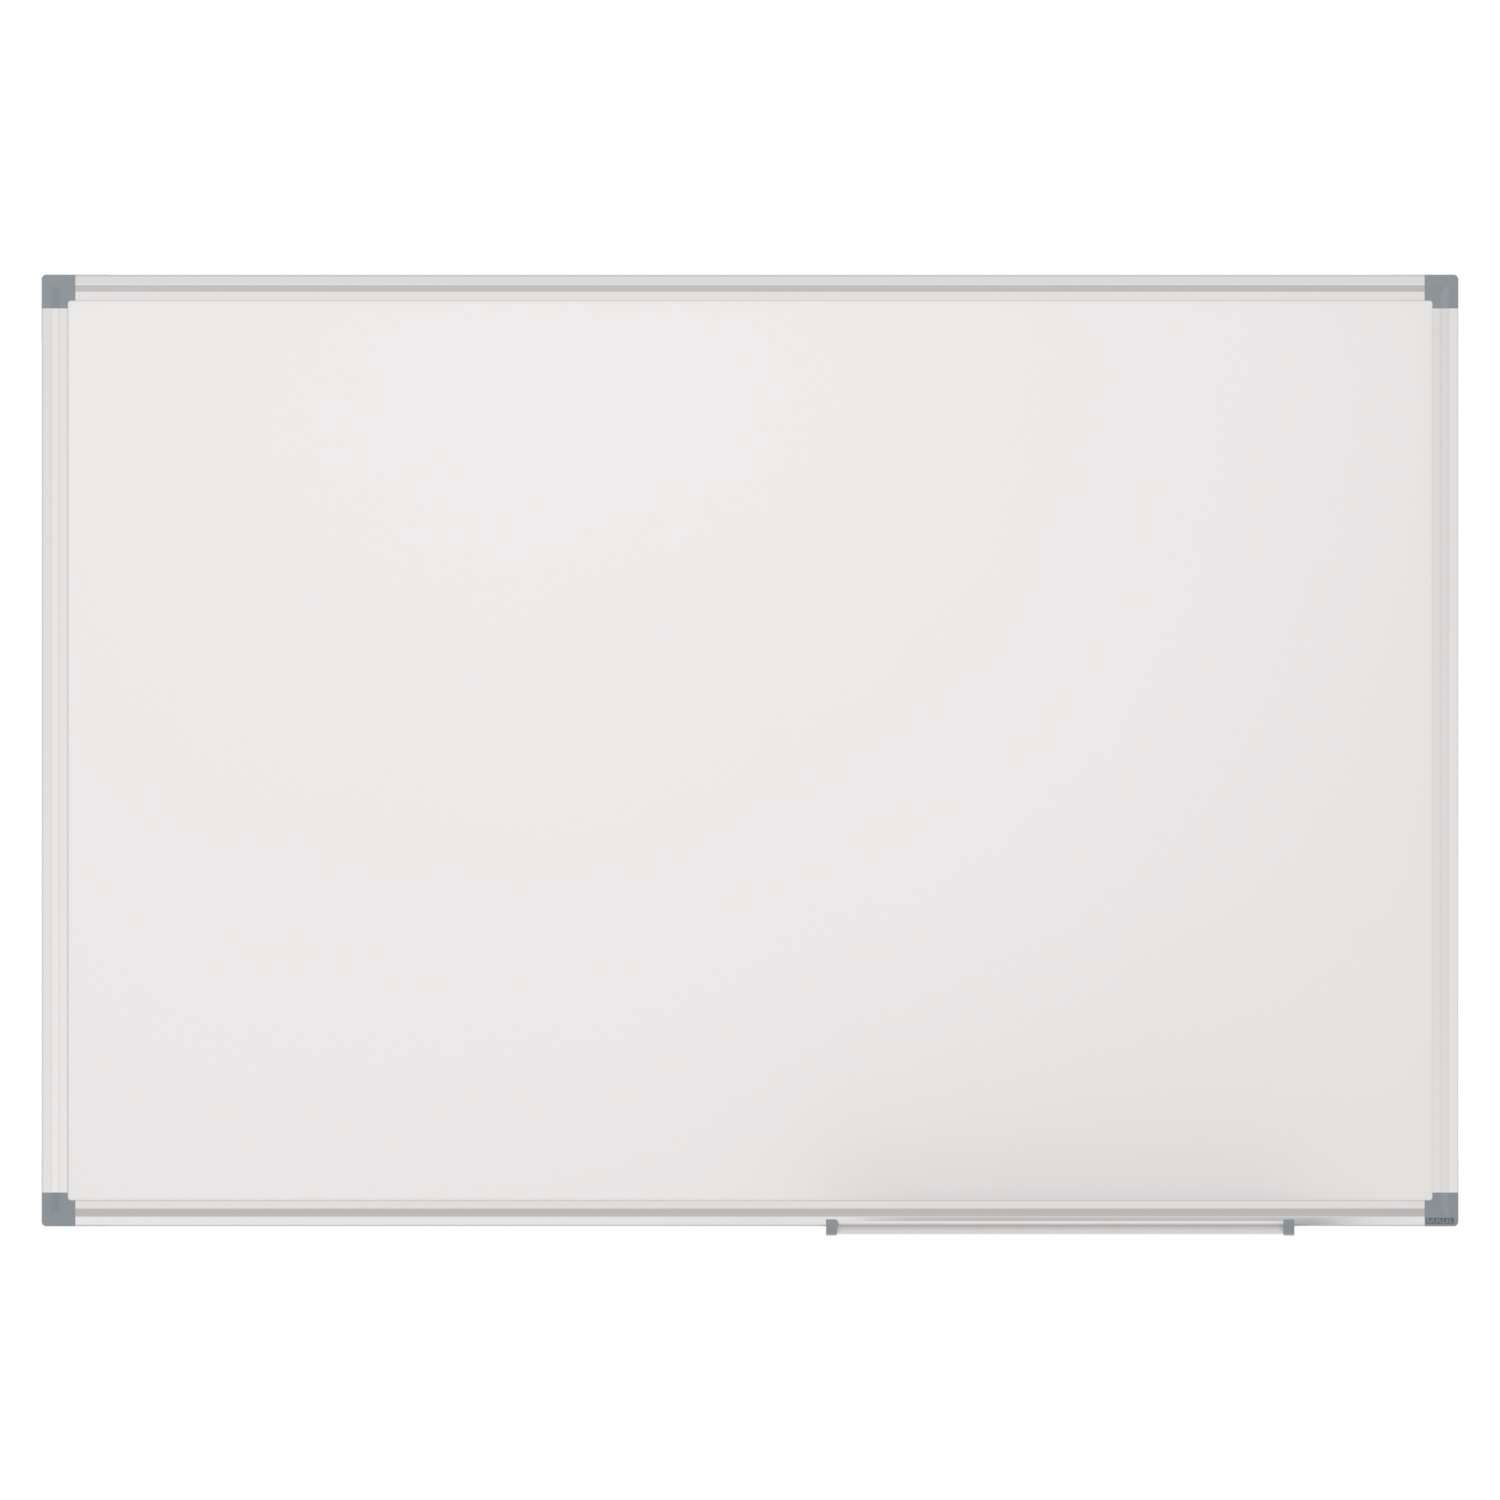 Whiteboard MAULstandard, Emaille, 60x90 cm